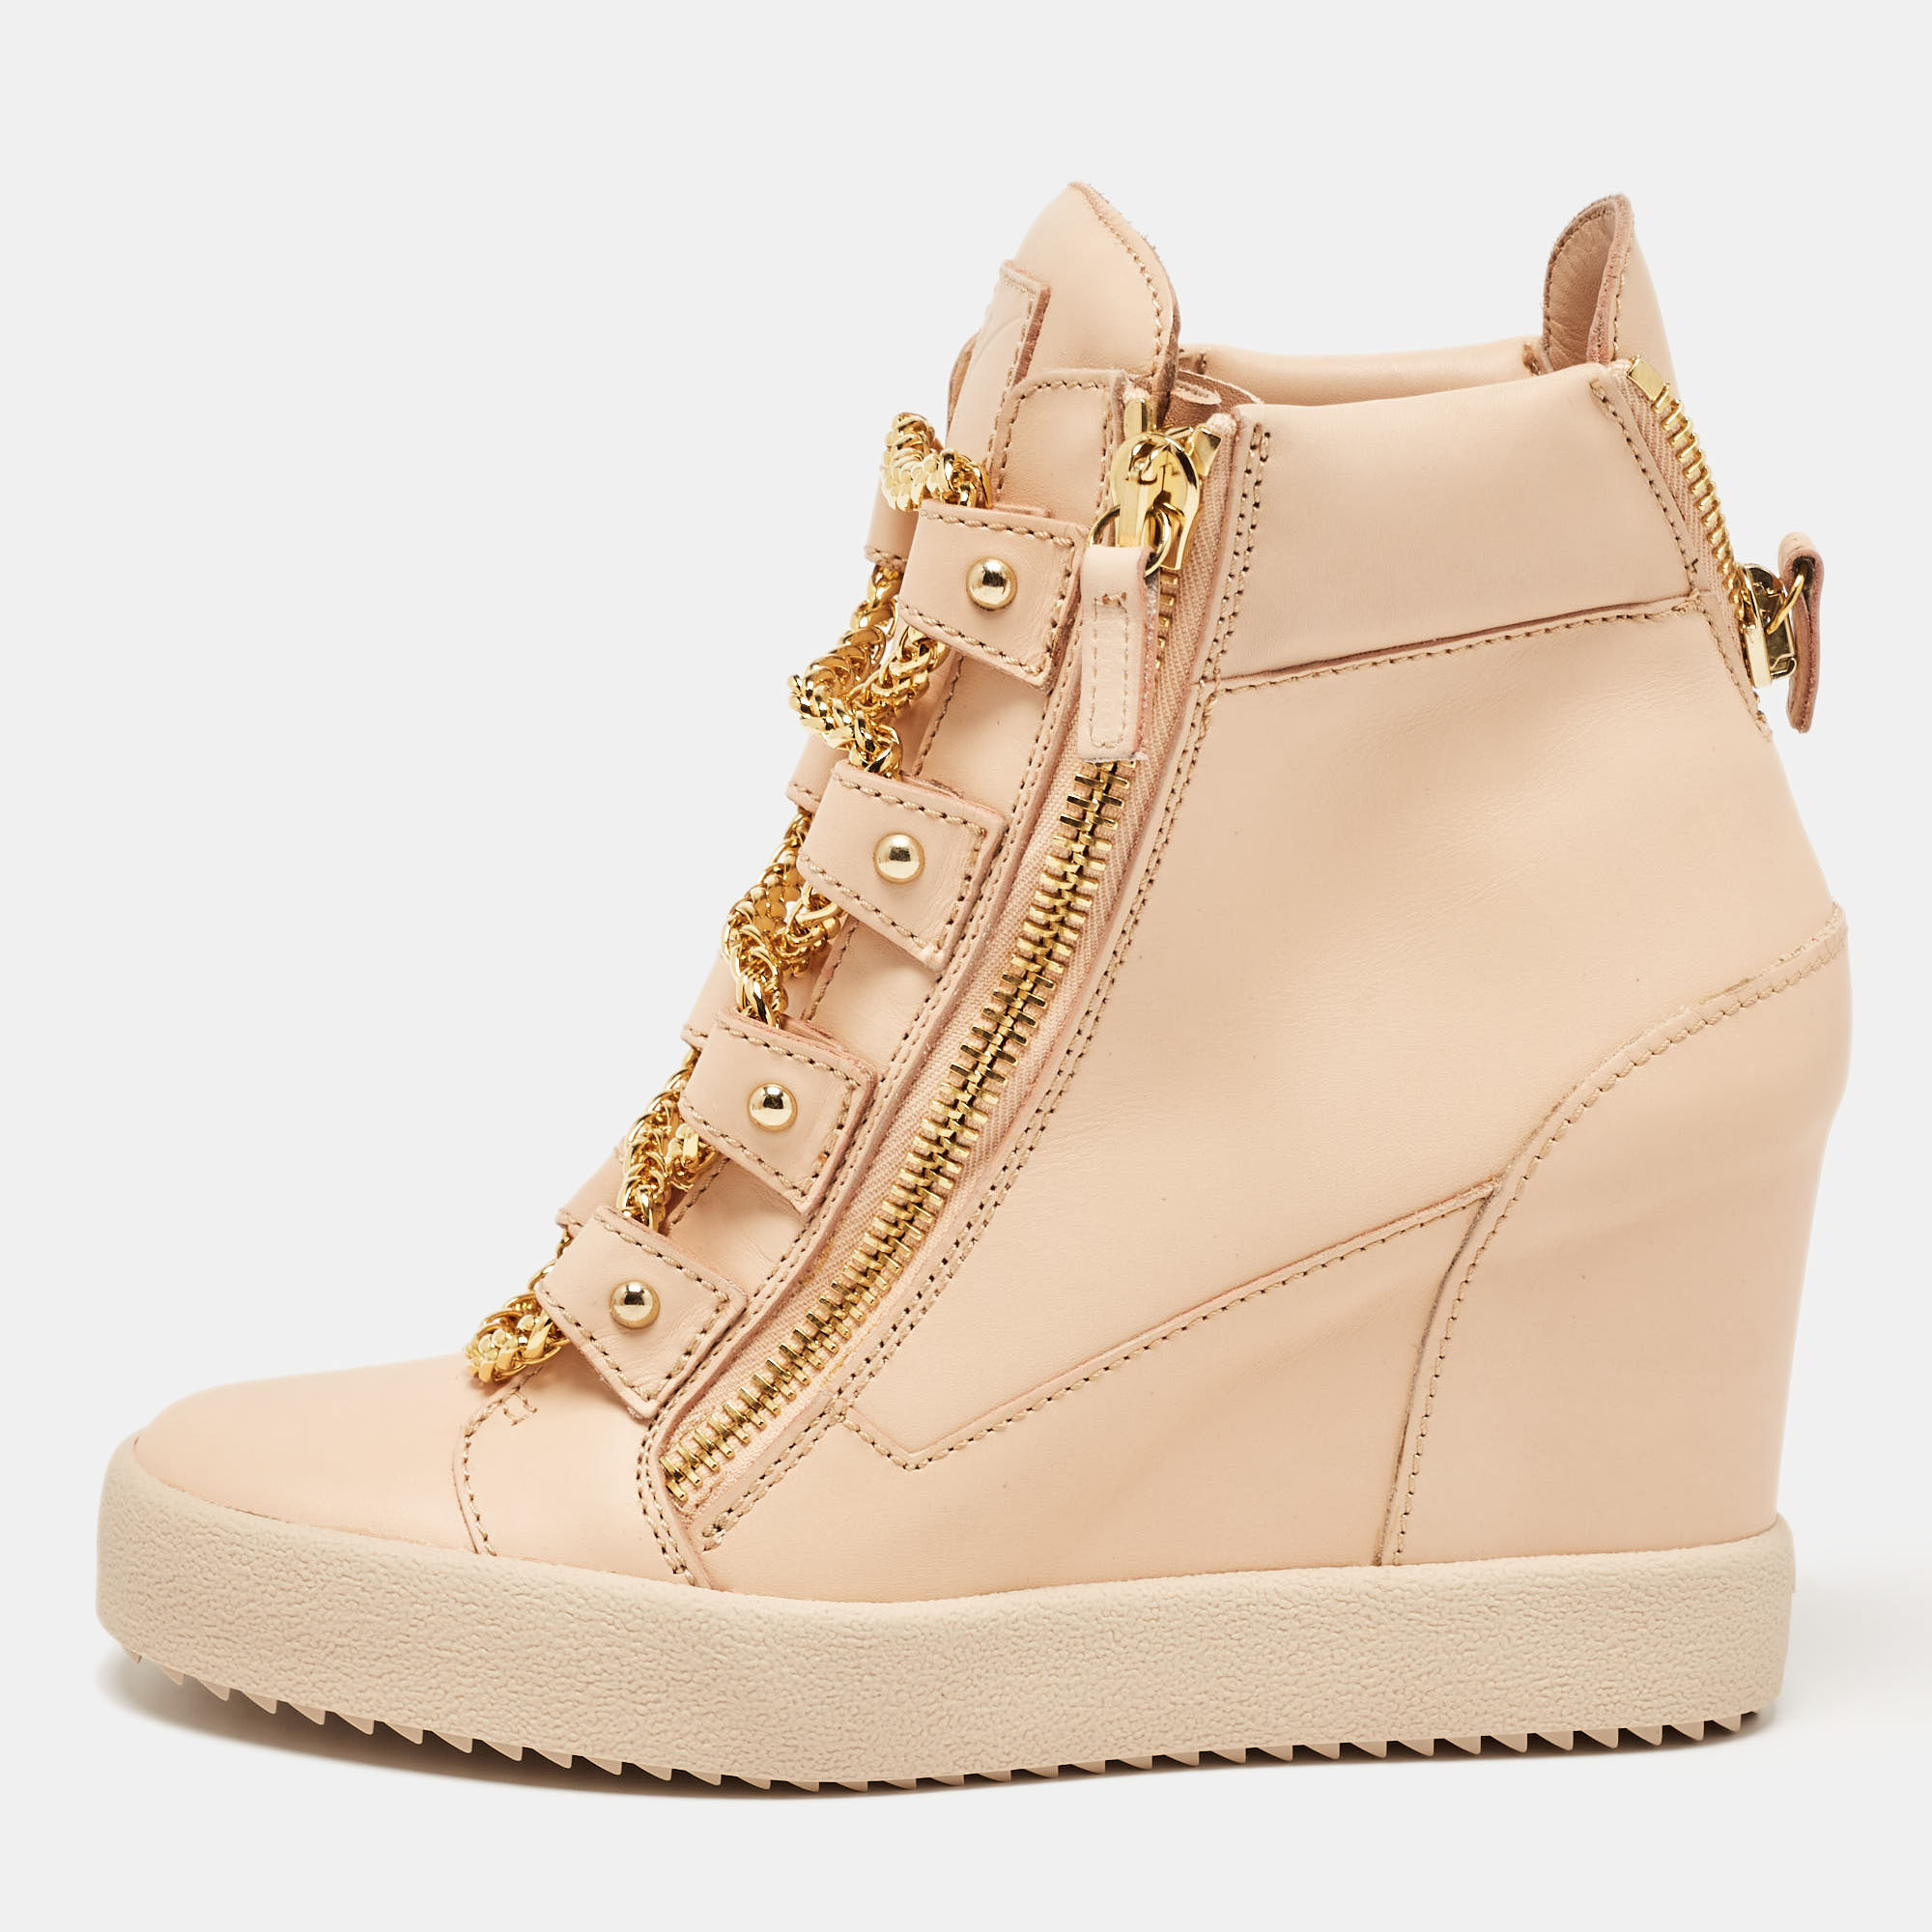 Pre-owned Giuseppe Zanotti Beige Leather Chain Detail High Top Wedge Sneakers Size 41